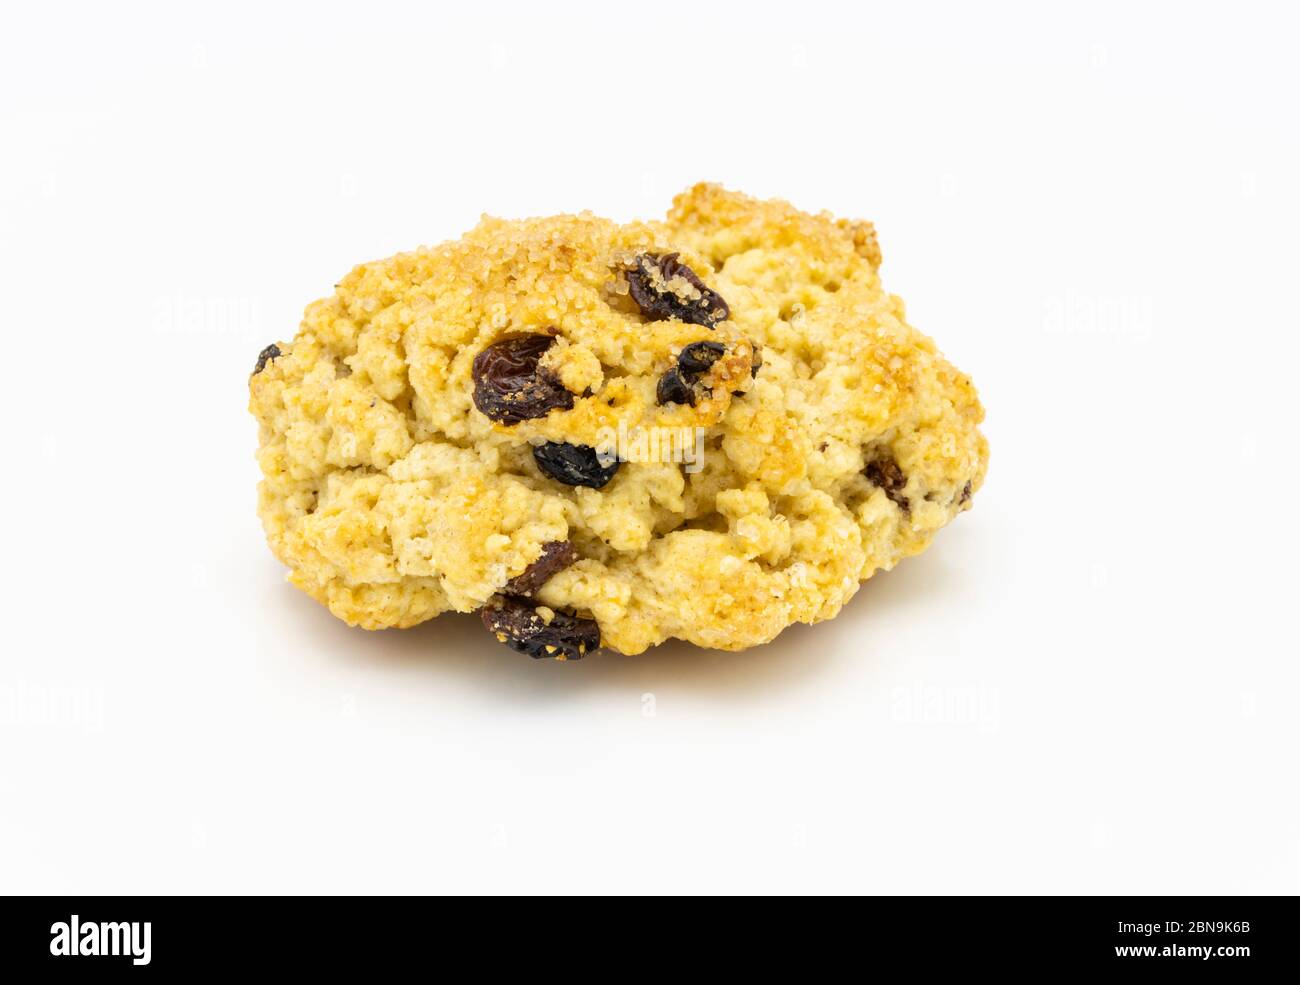 A single traditional delicious fresh golden home baked rock cake with raisins and brown sugar crystals viewed close up against a white background Stock Photo